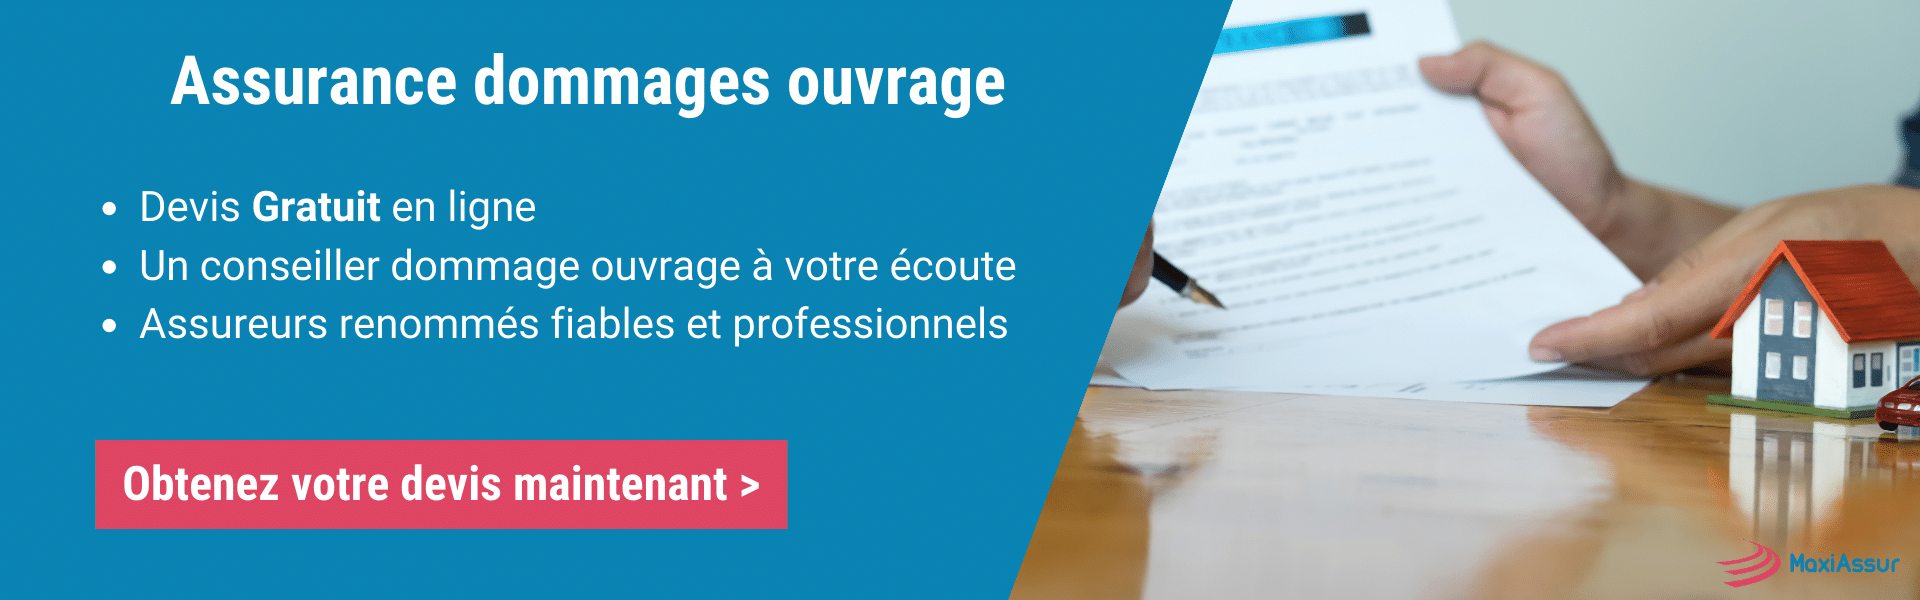 Recours assurance dommages ouvrage